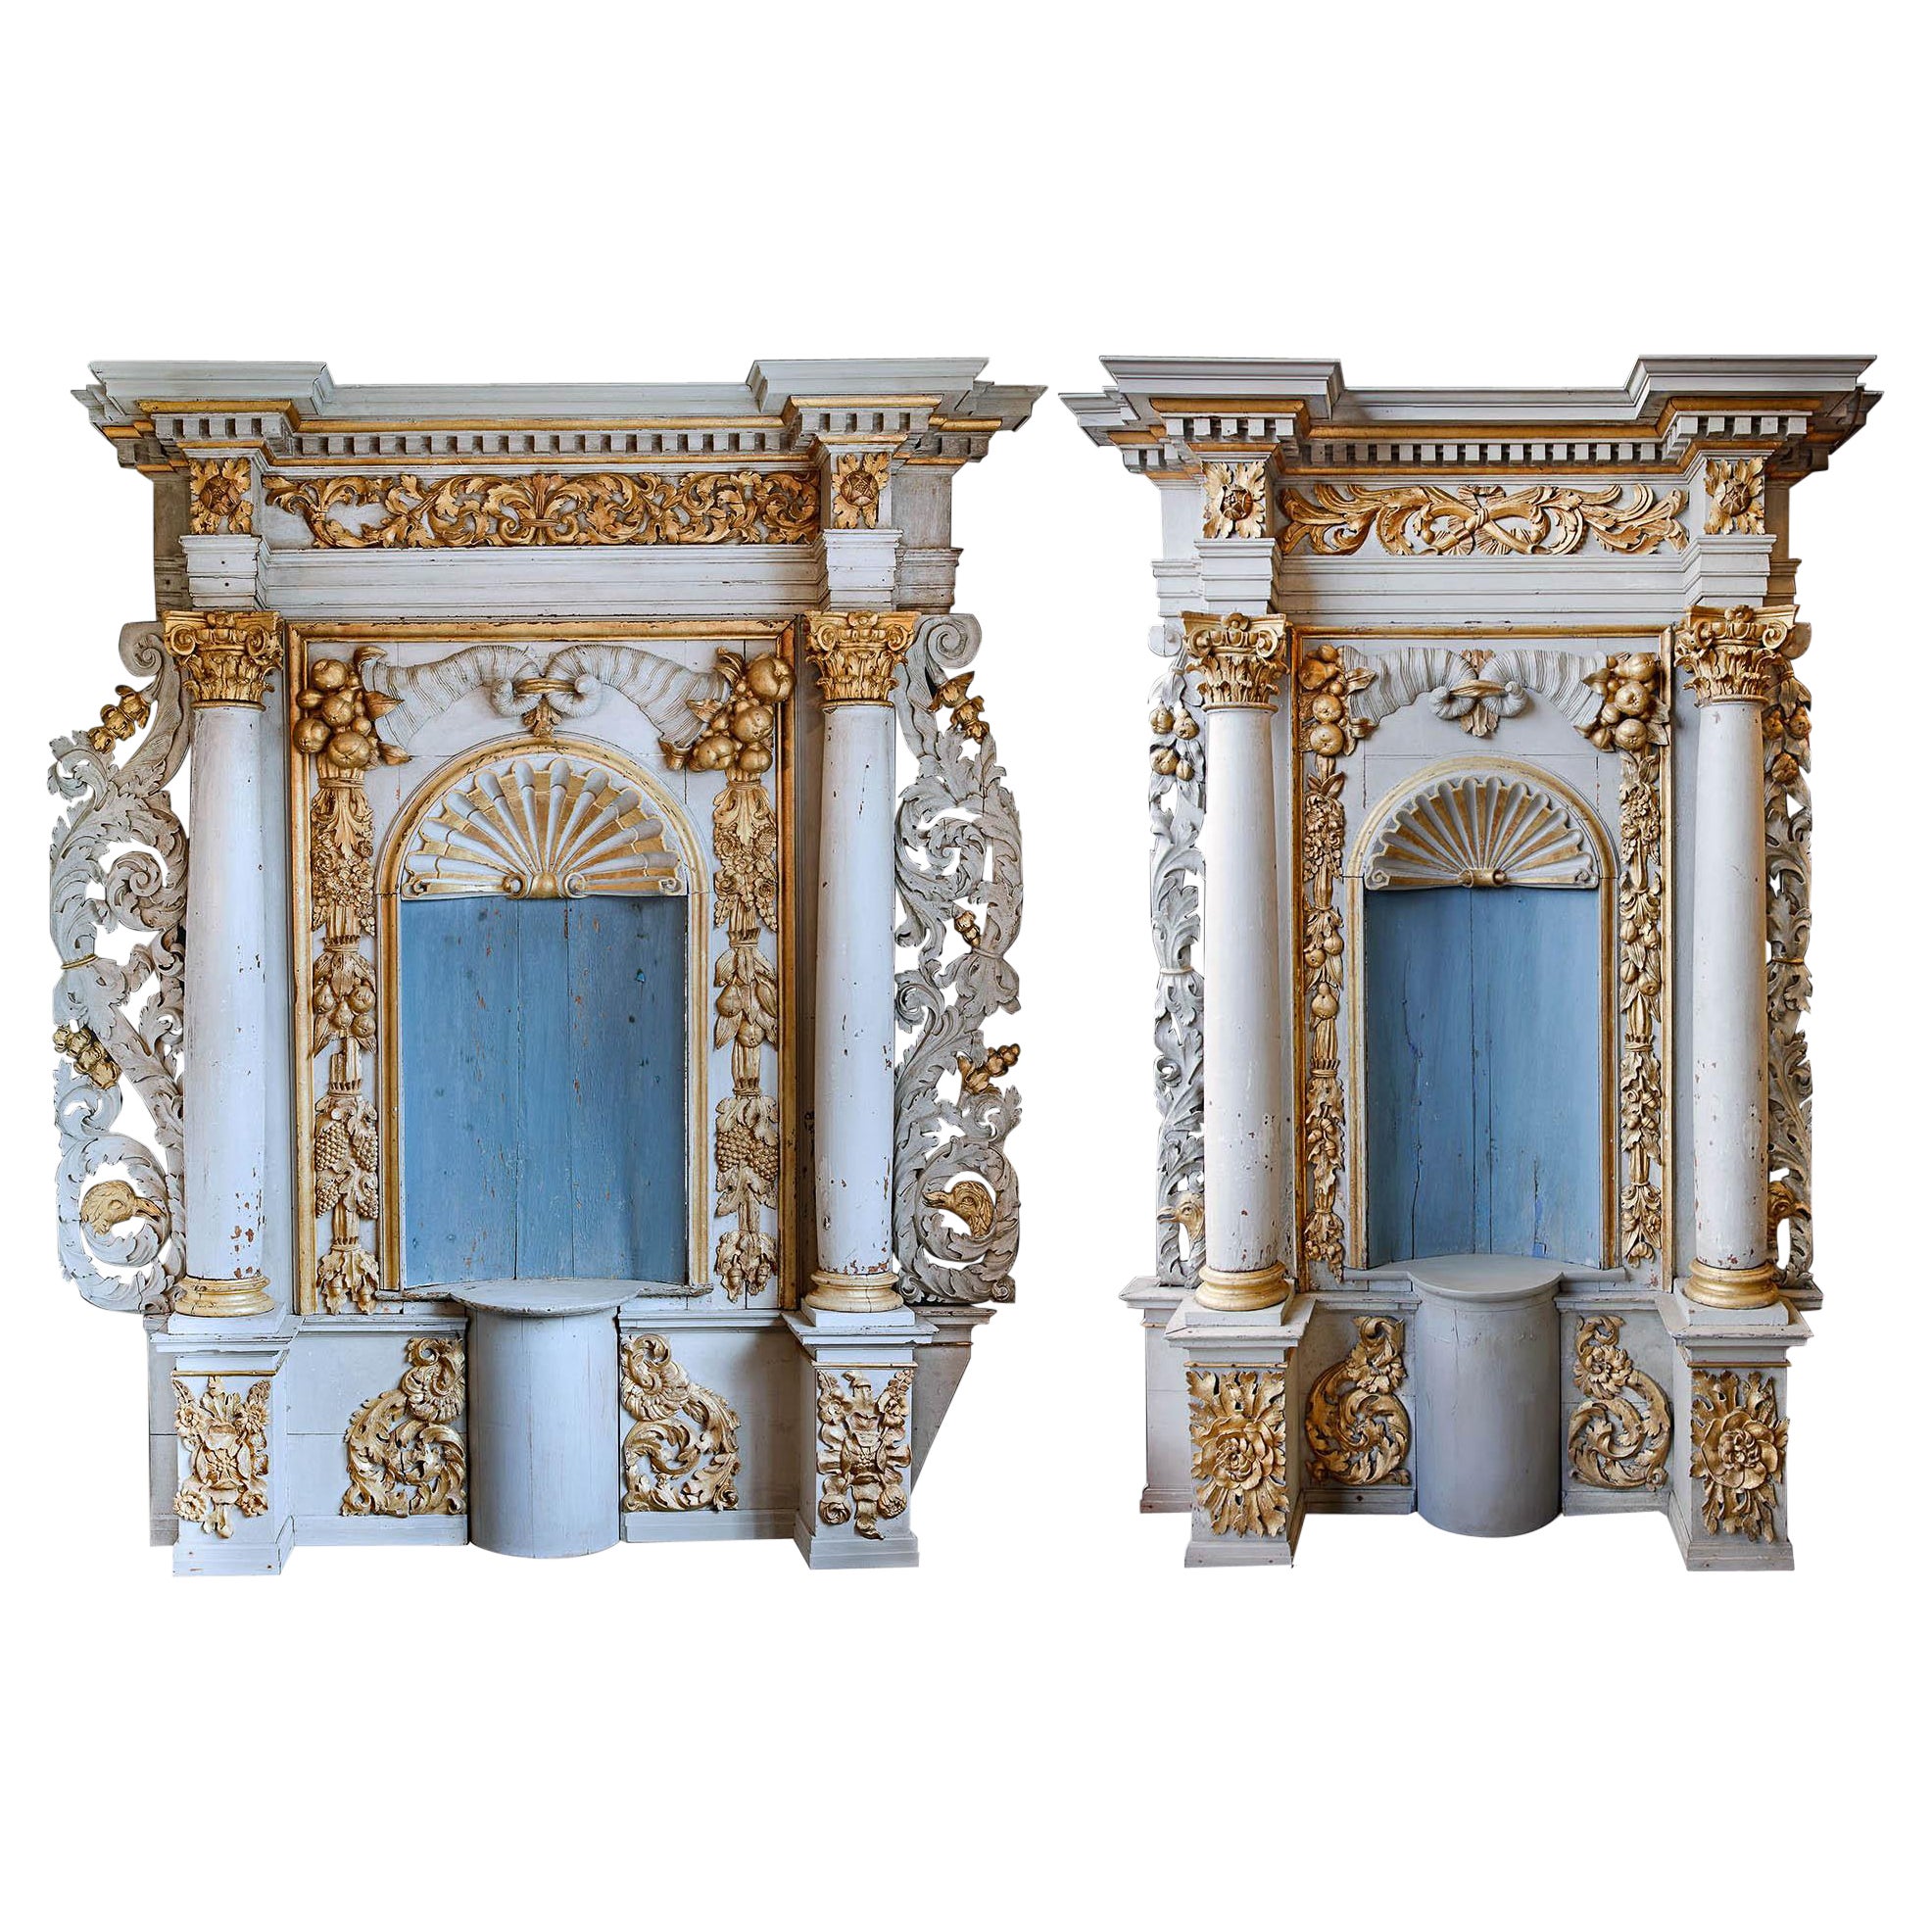 Two Early 17th Century Carved Oak and Gilt French Chapel Niches